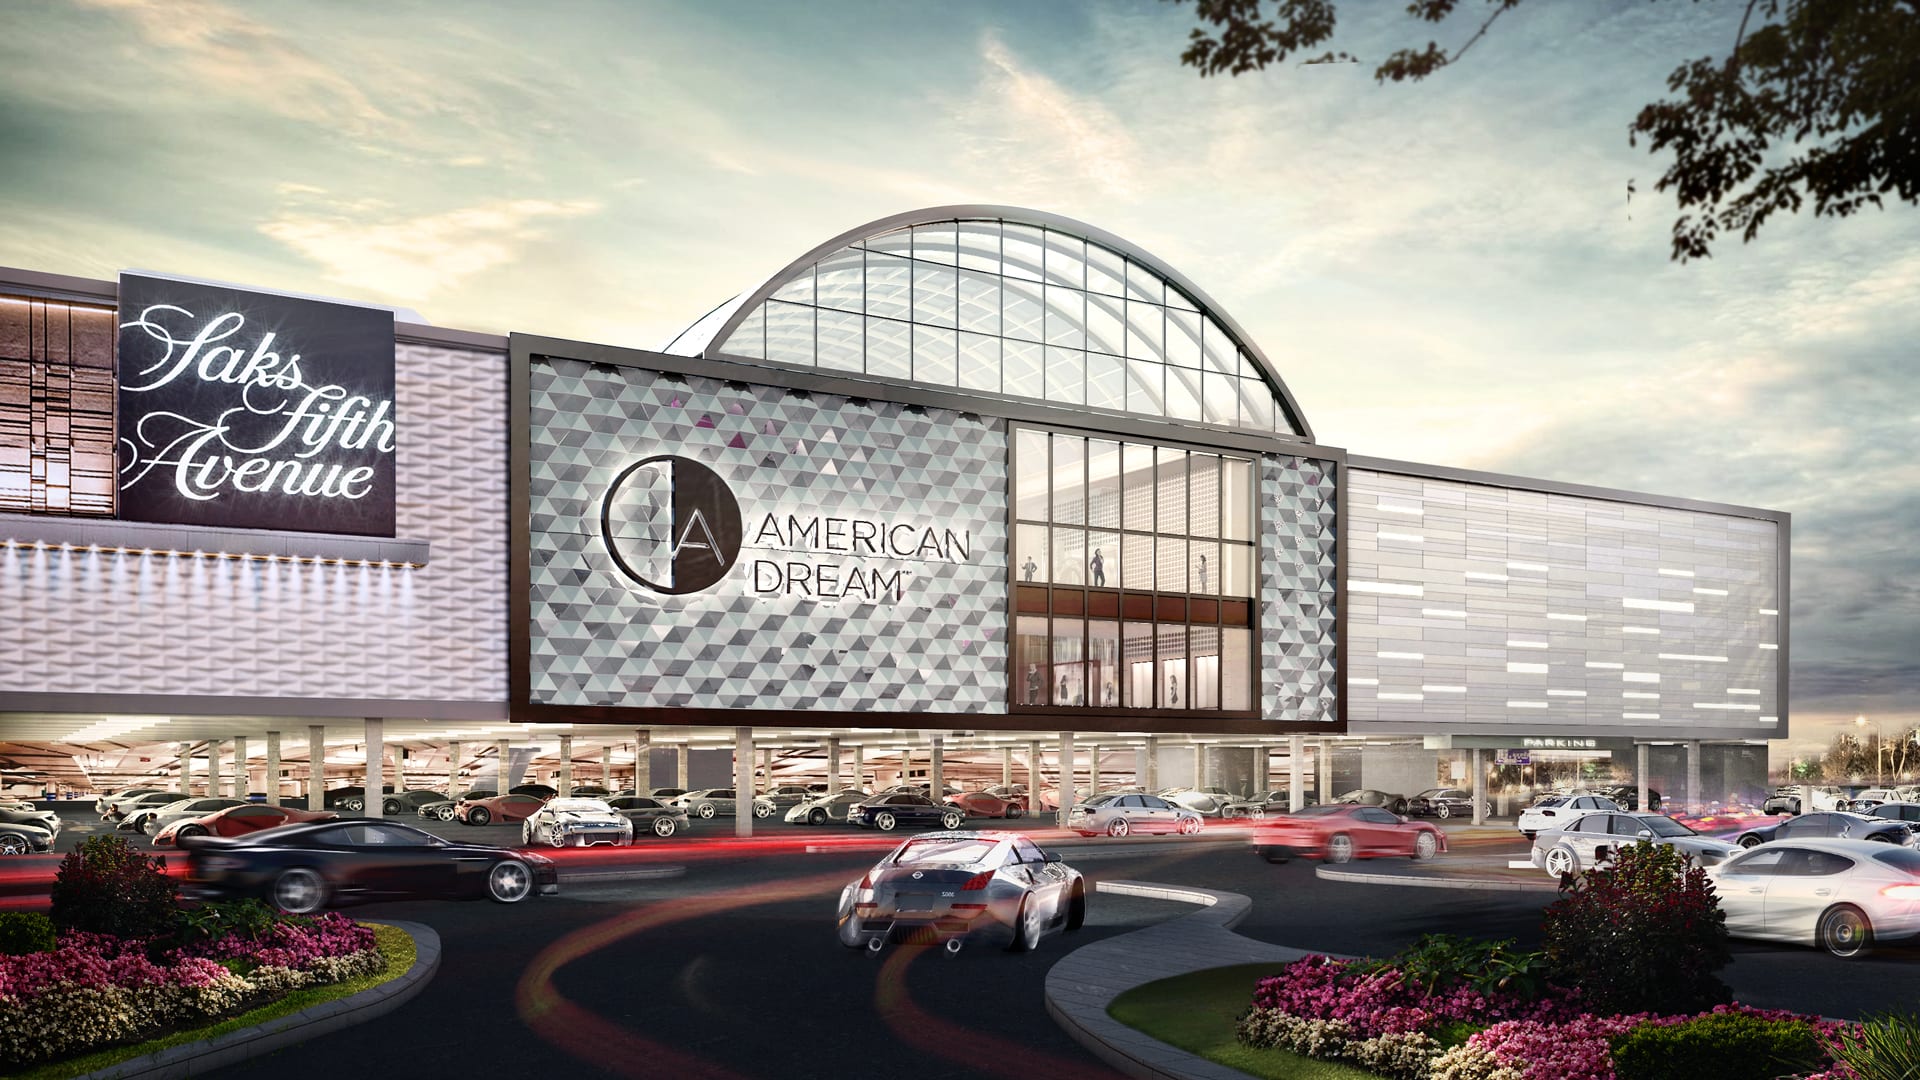 See it! American Dream mega-mall opens in NJ with Legoland, theme park, and 33K parking spots